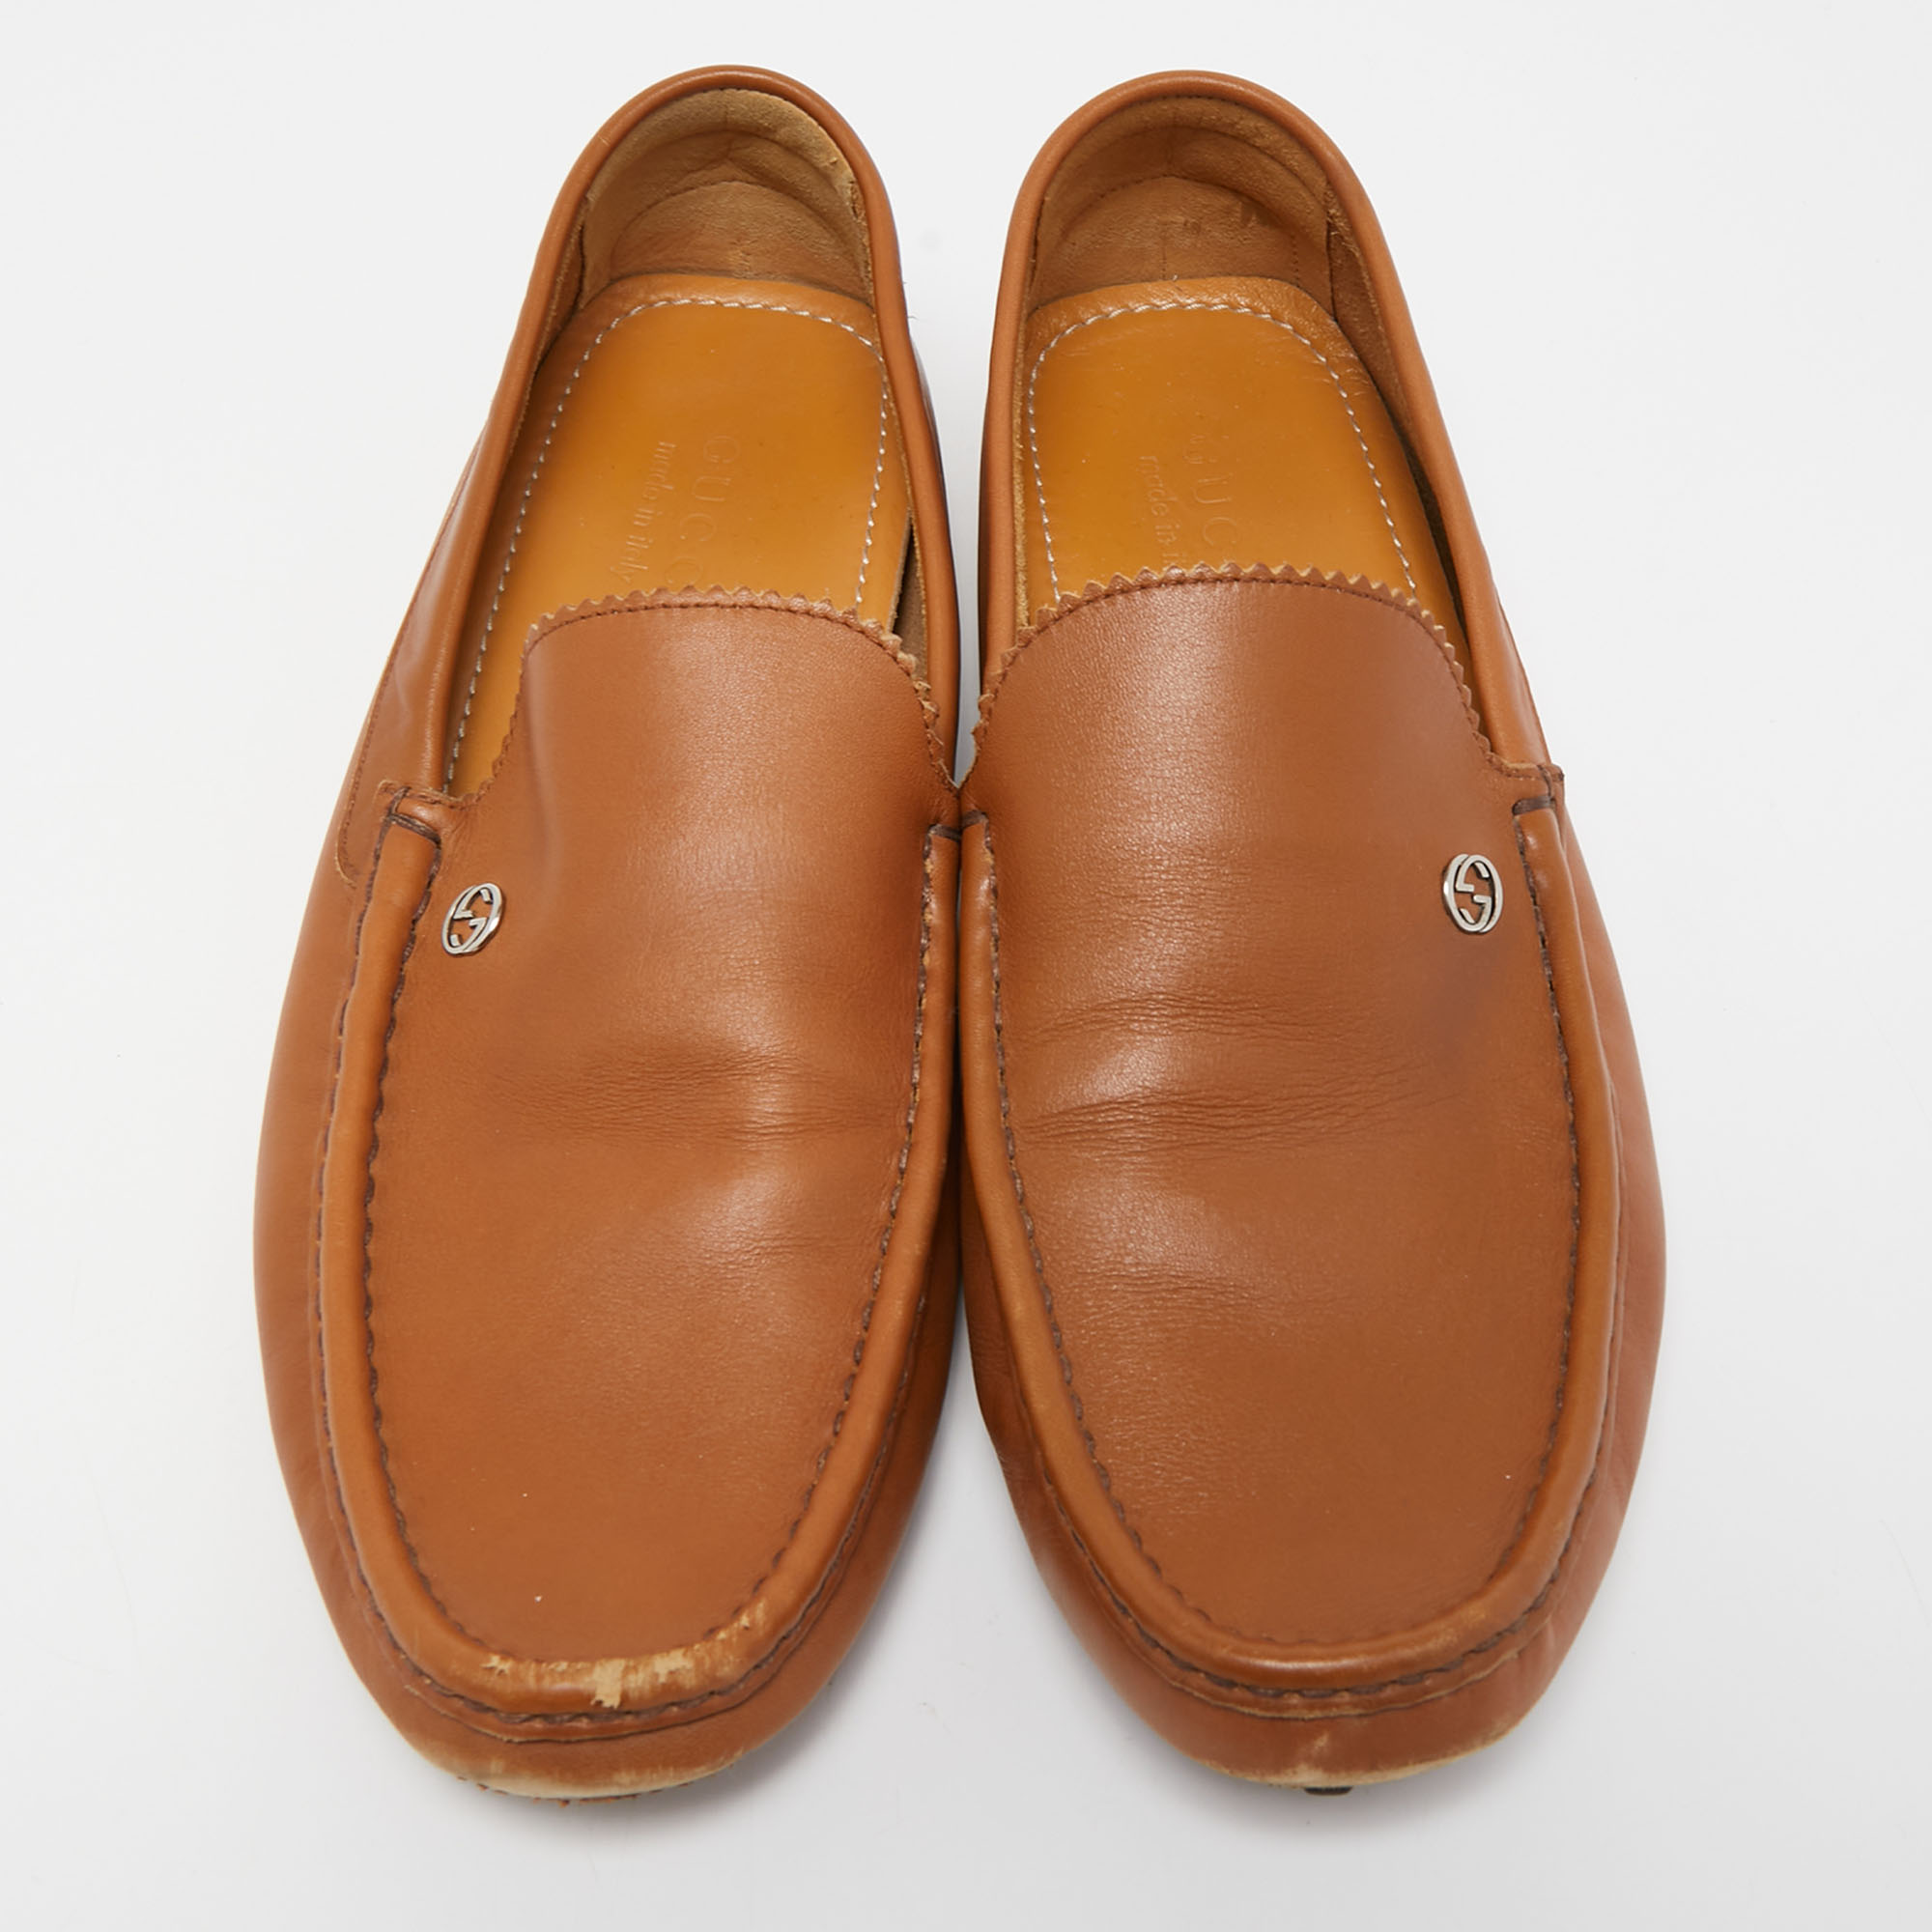 Gucci Brown Leather Slip On Loafers Size 43.5